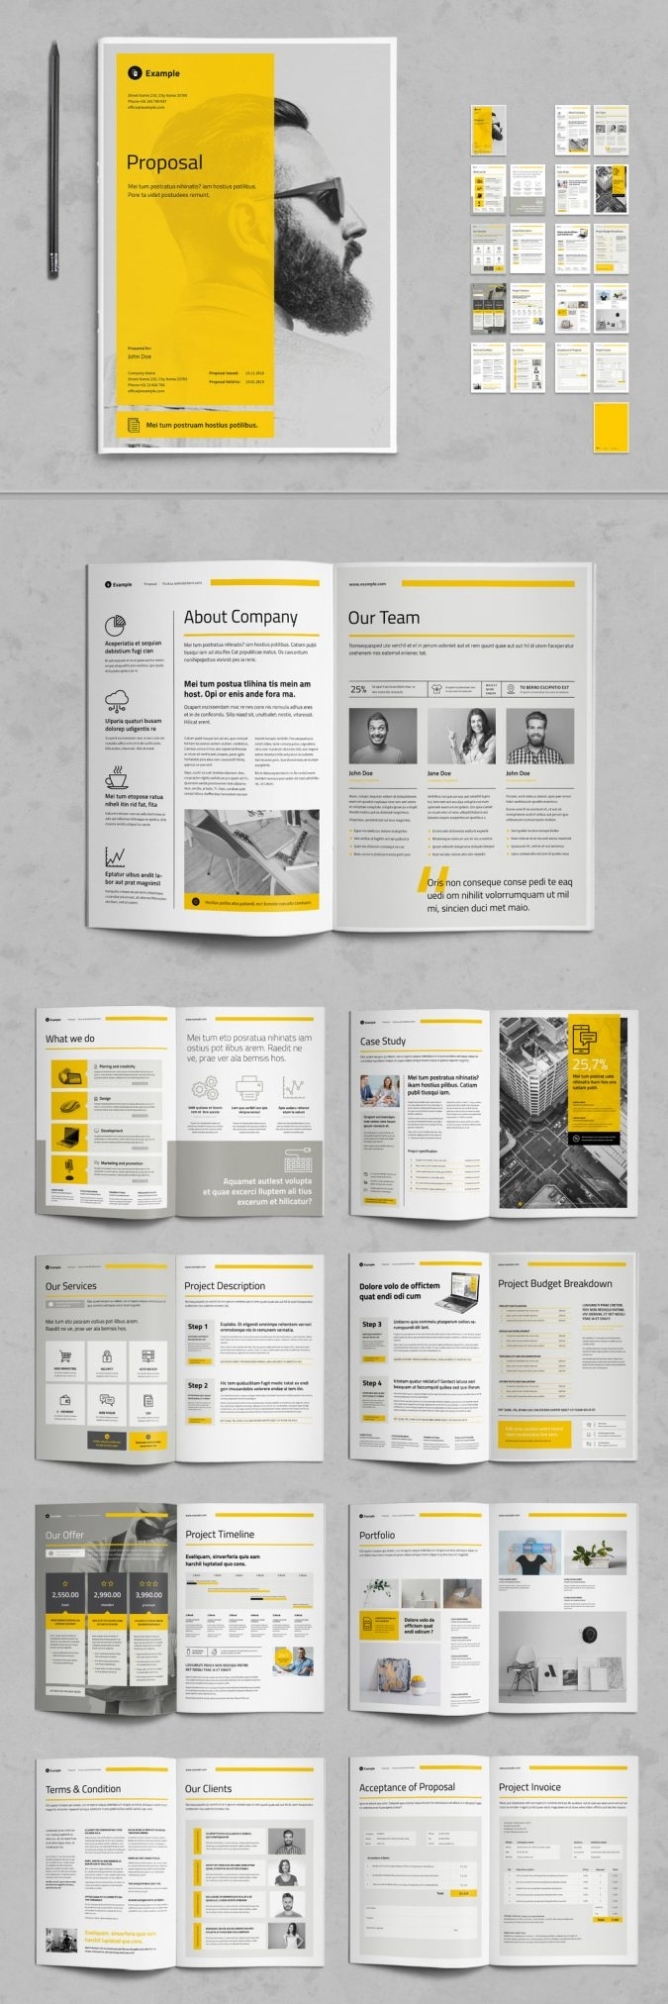 A Business Proposal Template With Yellow And Gray Accents For Adobe With Regard To Business Plan Template Indesign